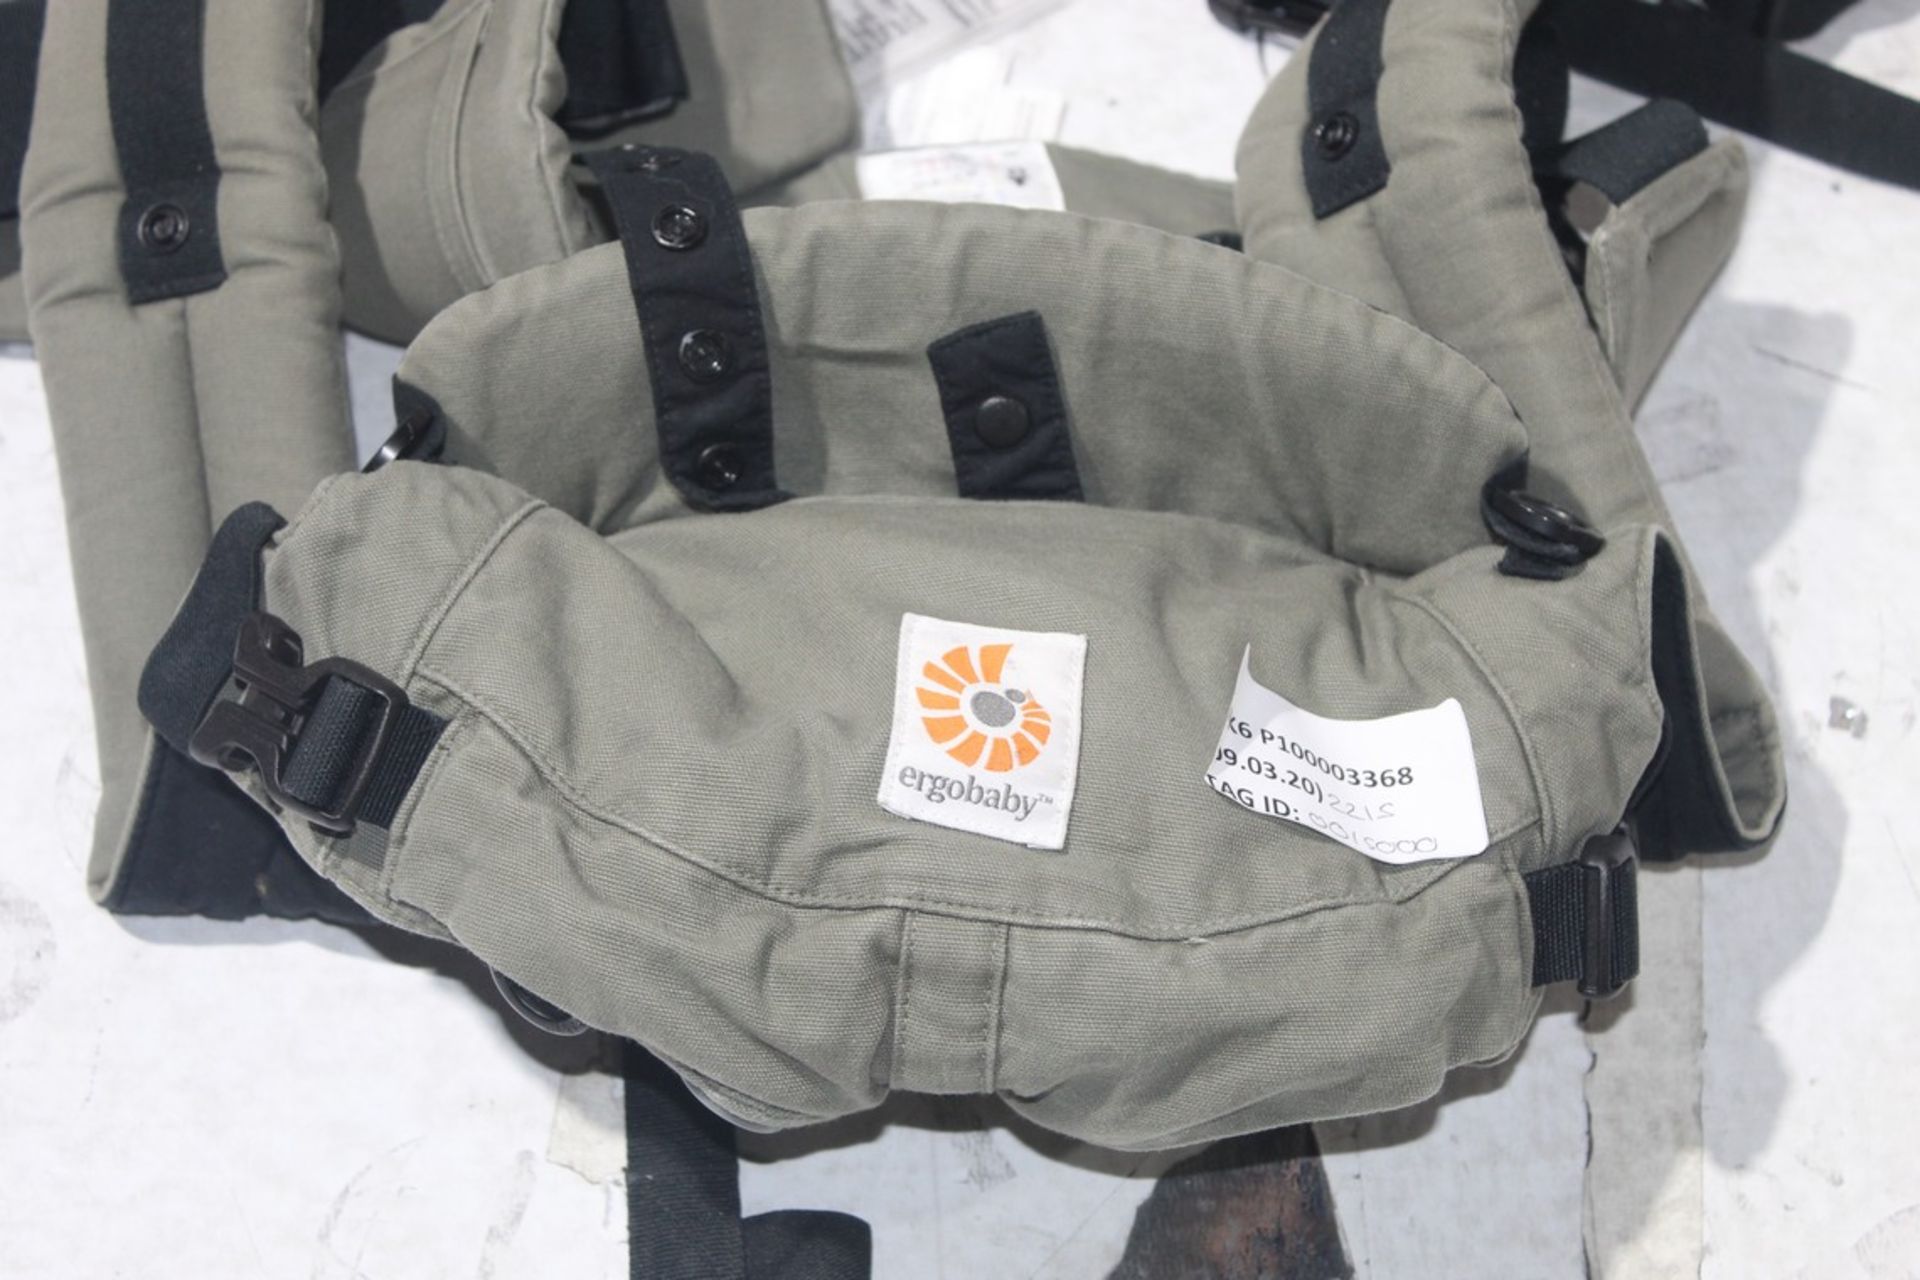 Unboxed Ergo Baby Carrier RRP £150 2215